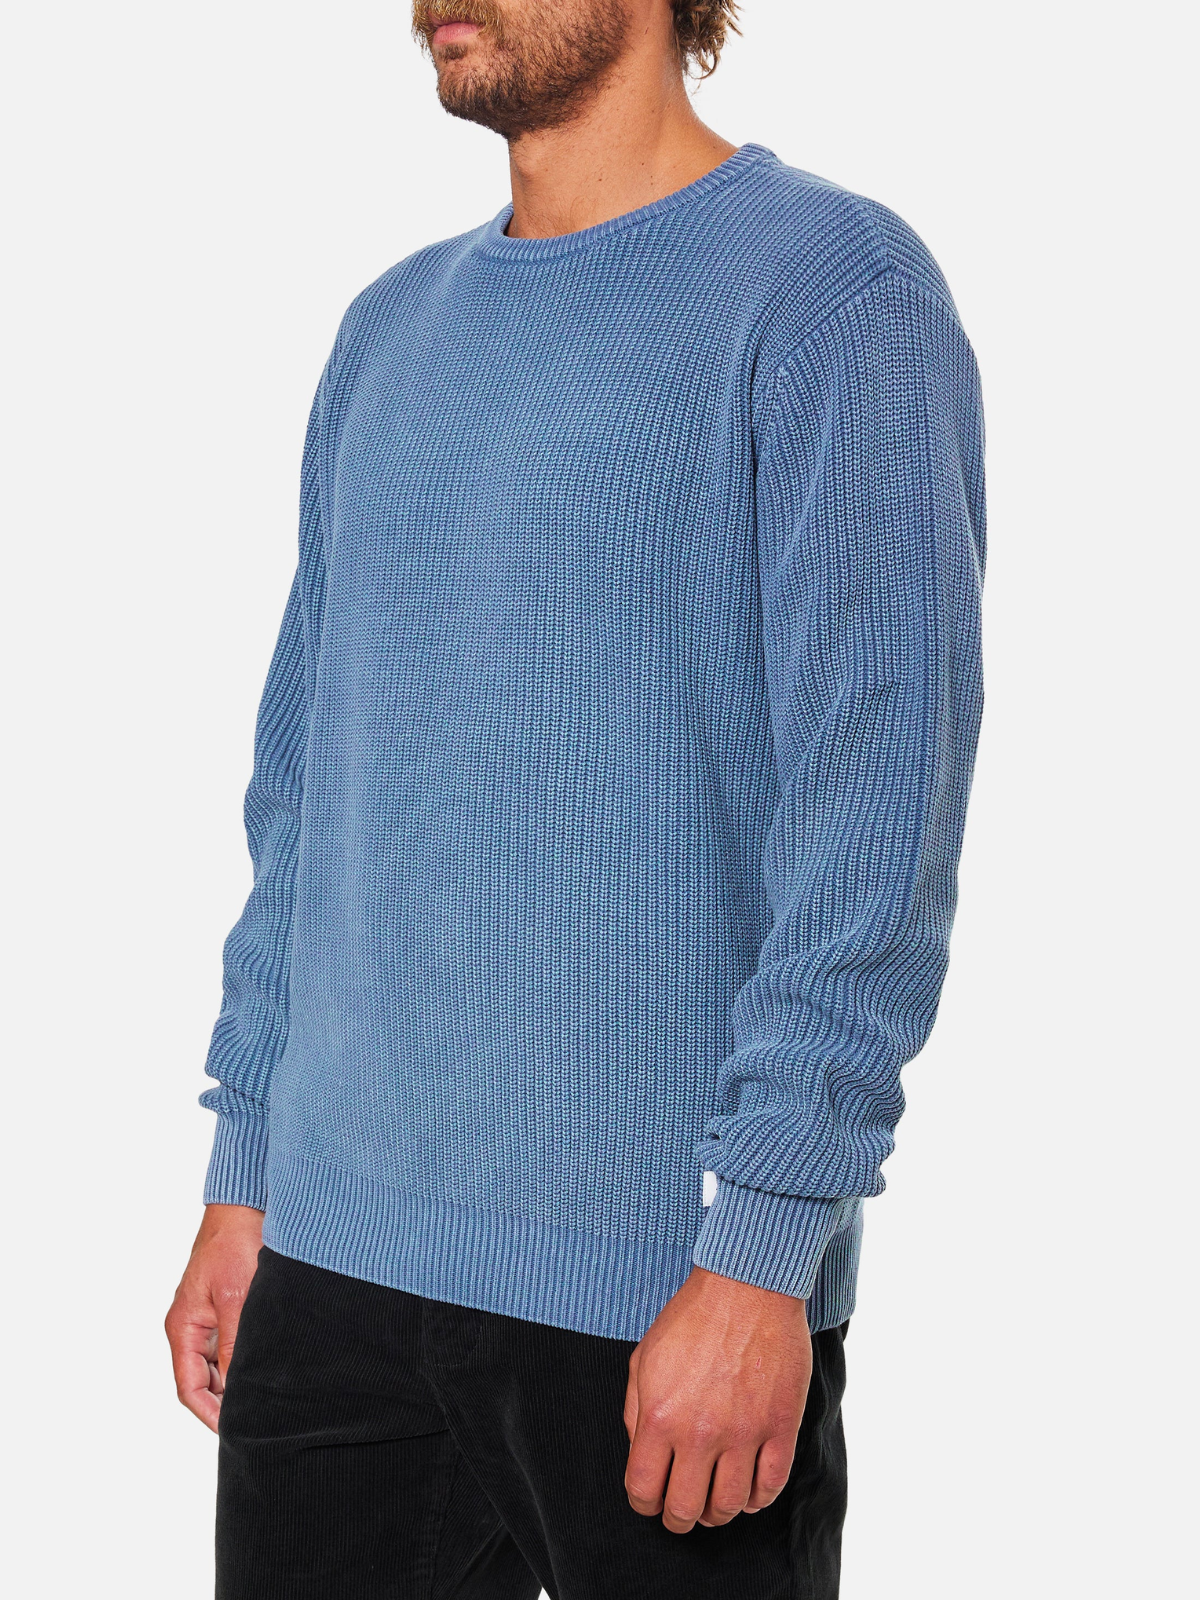 katin swell sweater washed blue cyan cable knit shaker stitch knit jumper crewneck ribbed cuff kempt athens ga georgia men's clothing store